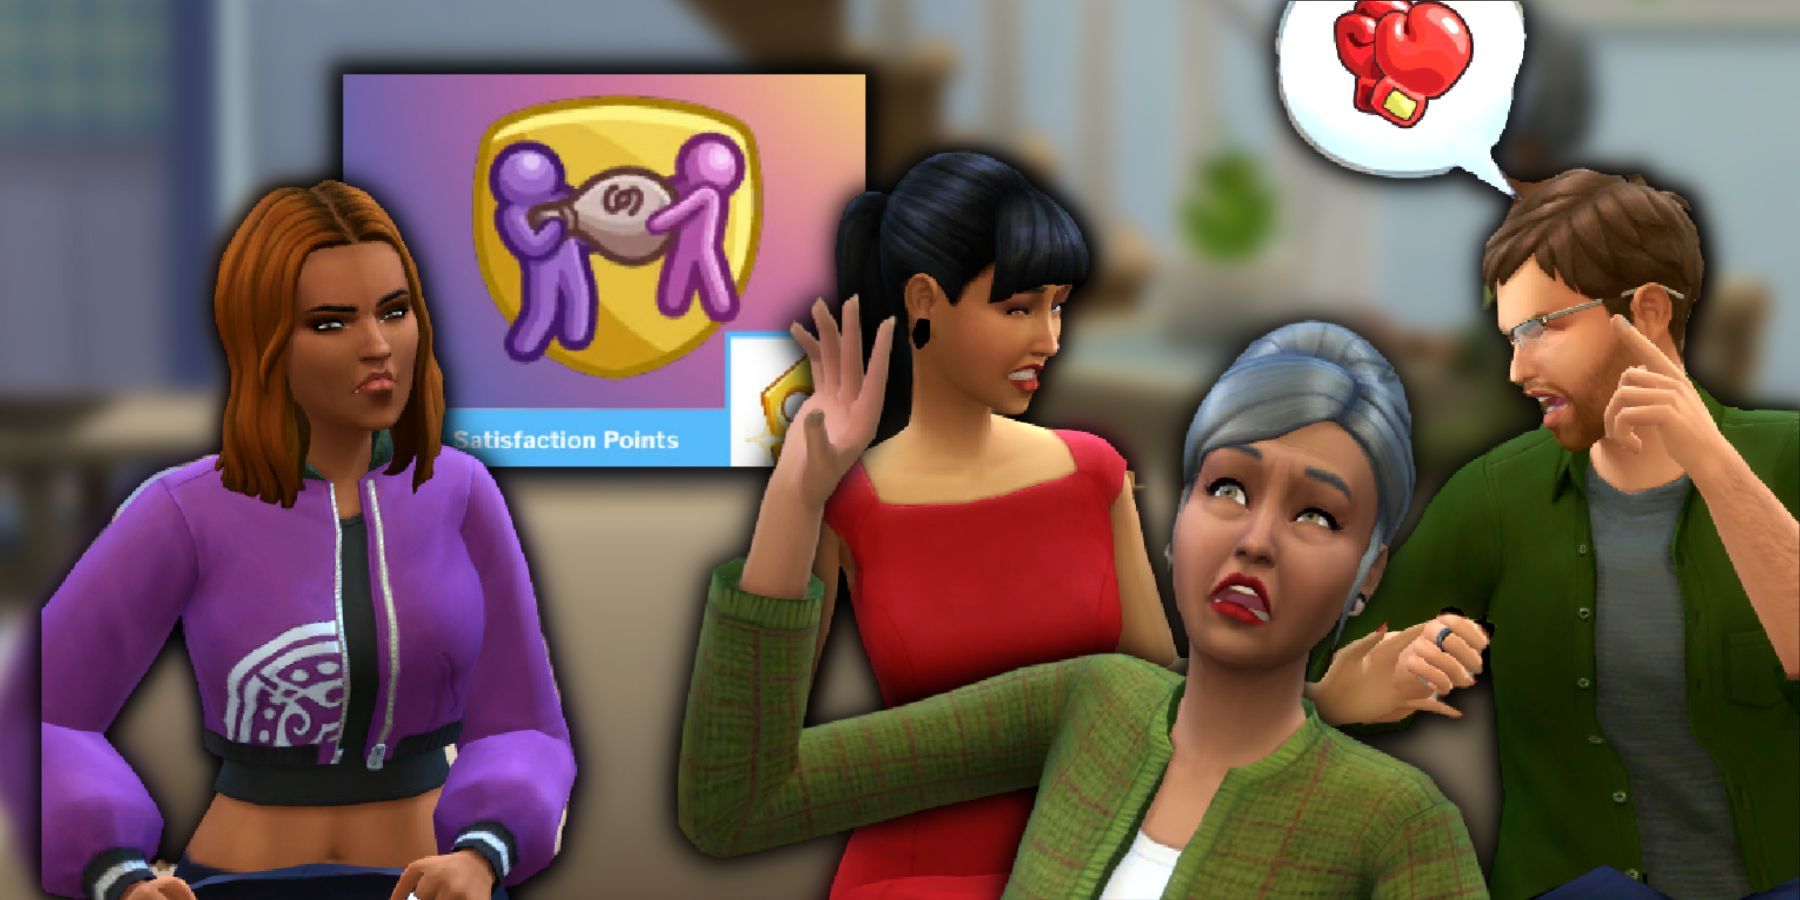 How to GIVE Yourself or Get RID of MONEY in The Sims 4